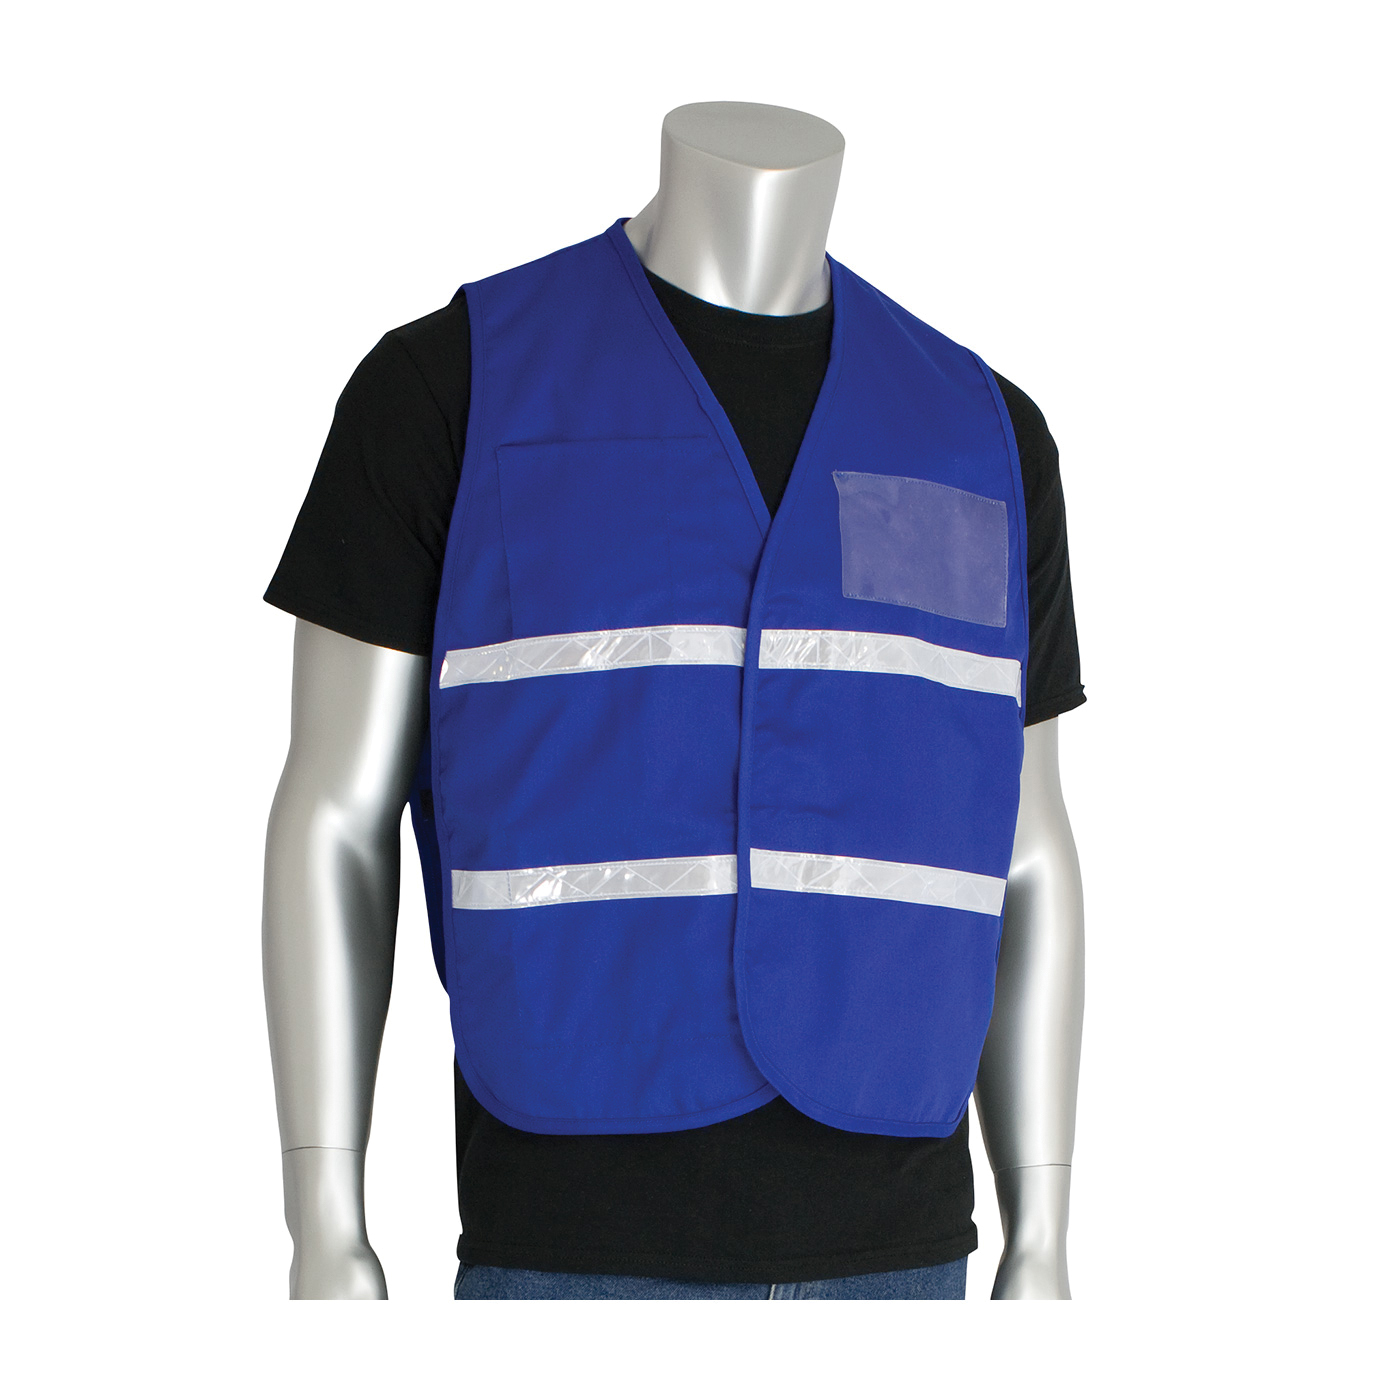 PIP® 300-2504/4X-5X 300-2500 Non-ANSI Incident Command Vest, 4XL/5XL, Royal Blue, 35% Cotton/65% Polyester, Hook and Loop Closure, 4 Pockets